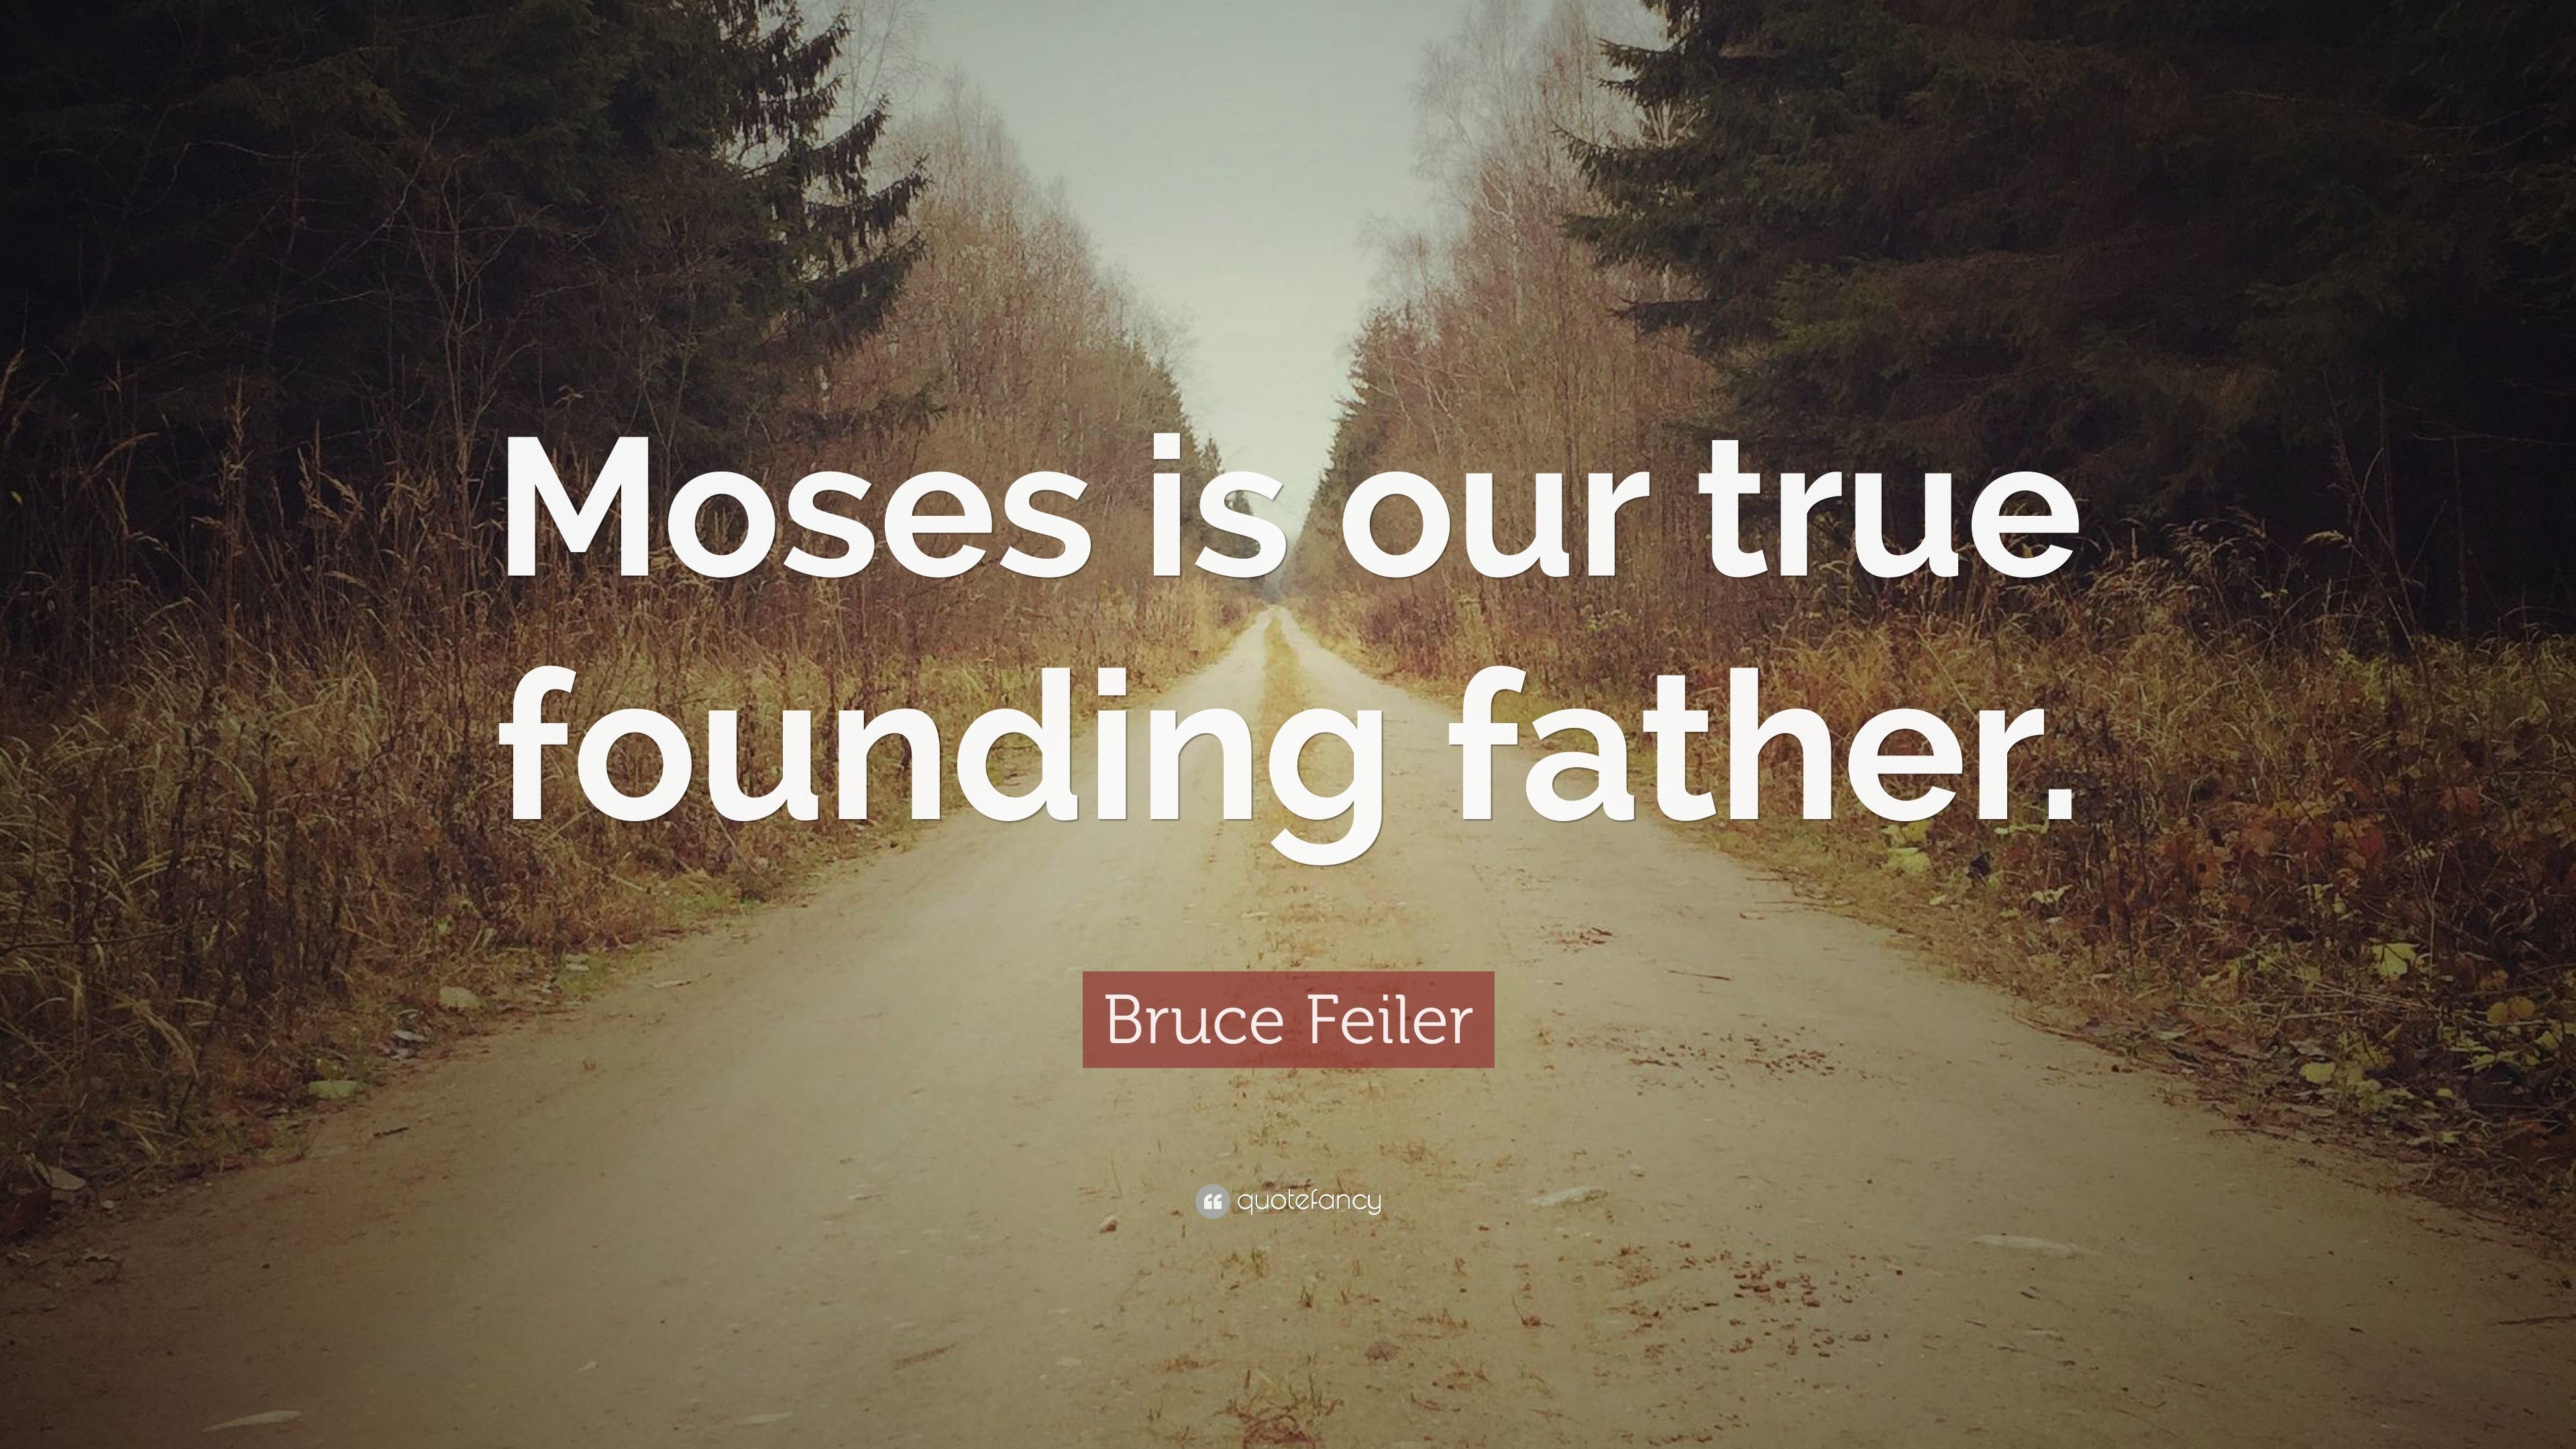 3840x2160 Bruce Feiler Quote: “Moses is our true founding father.”